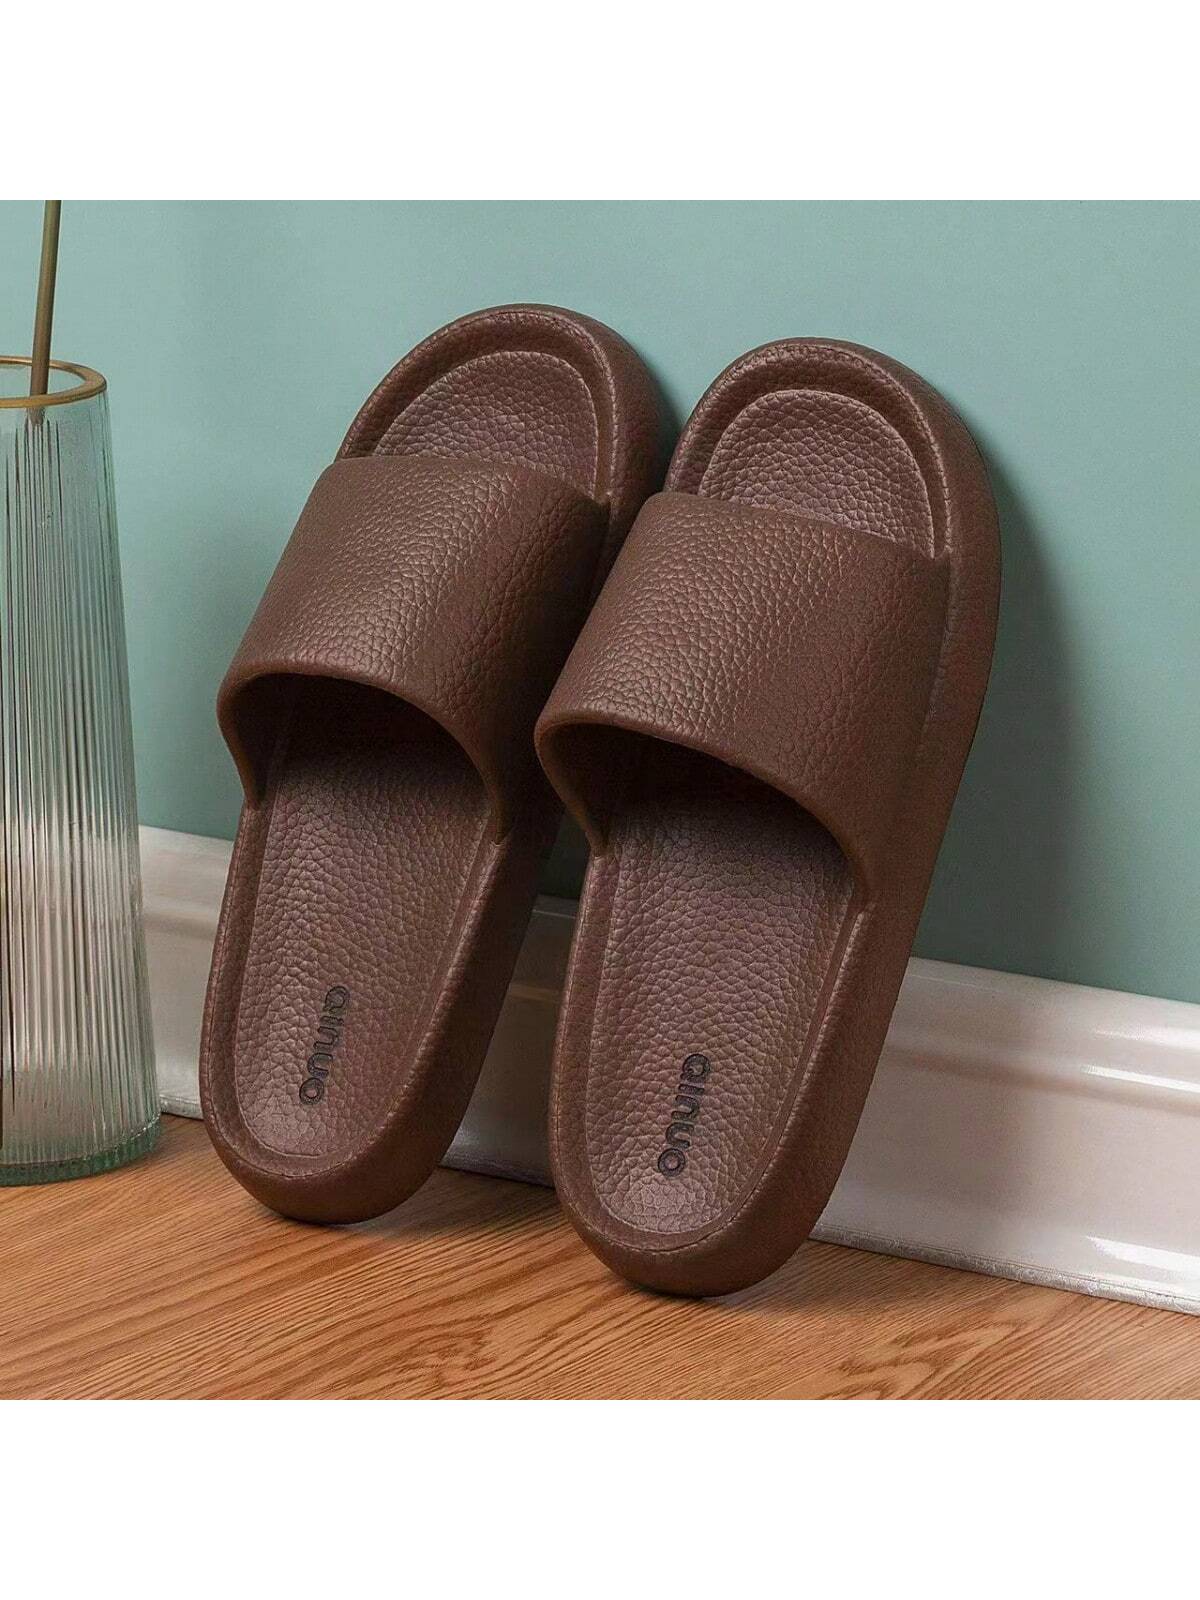 New Fashion Cool Couples' Pu Leather Soft Indoor/outdoor Slippers, Comfortable, Odor-free, Anti-slip, Breathable, Soft Sole, Dual-use, Suitable For Home Use, Beach And Outdoors